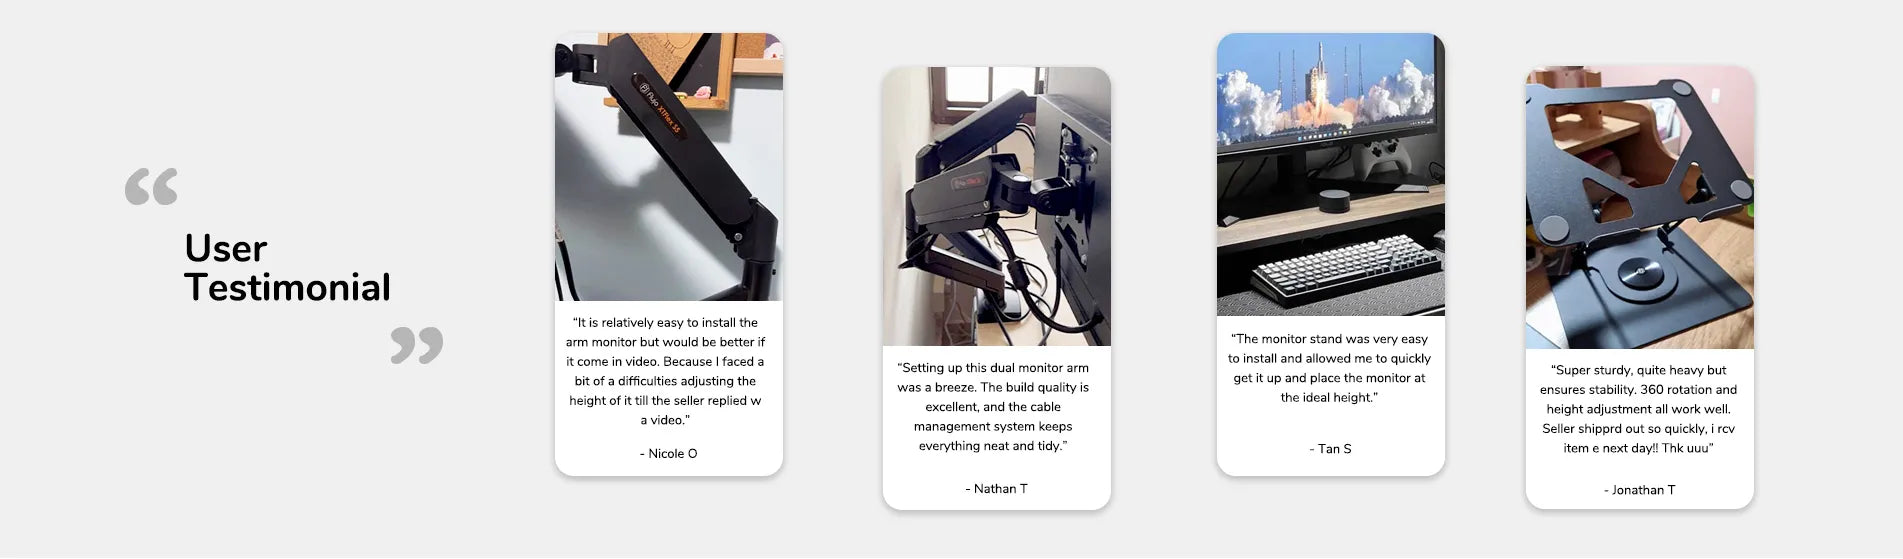 User testimonials on Flujo monitor arms showcasing ease of installation and quality.